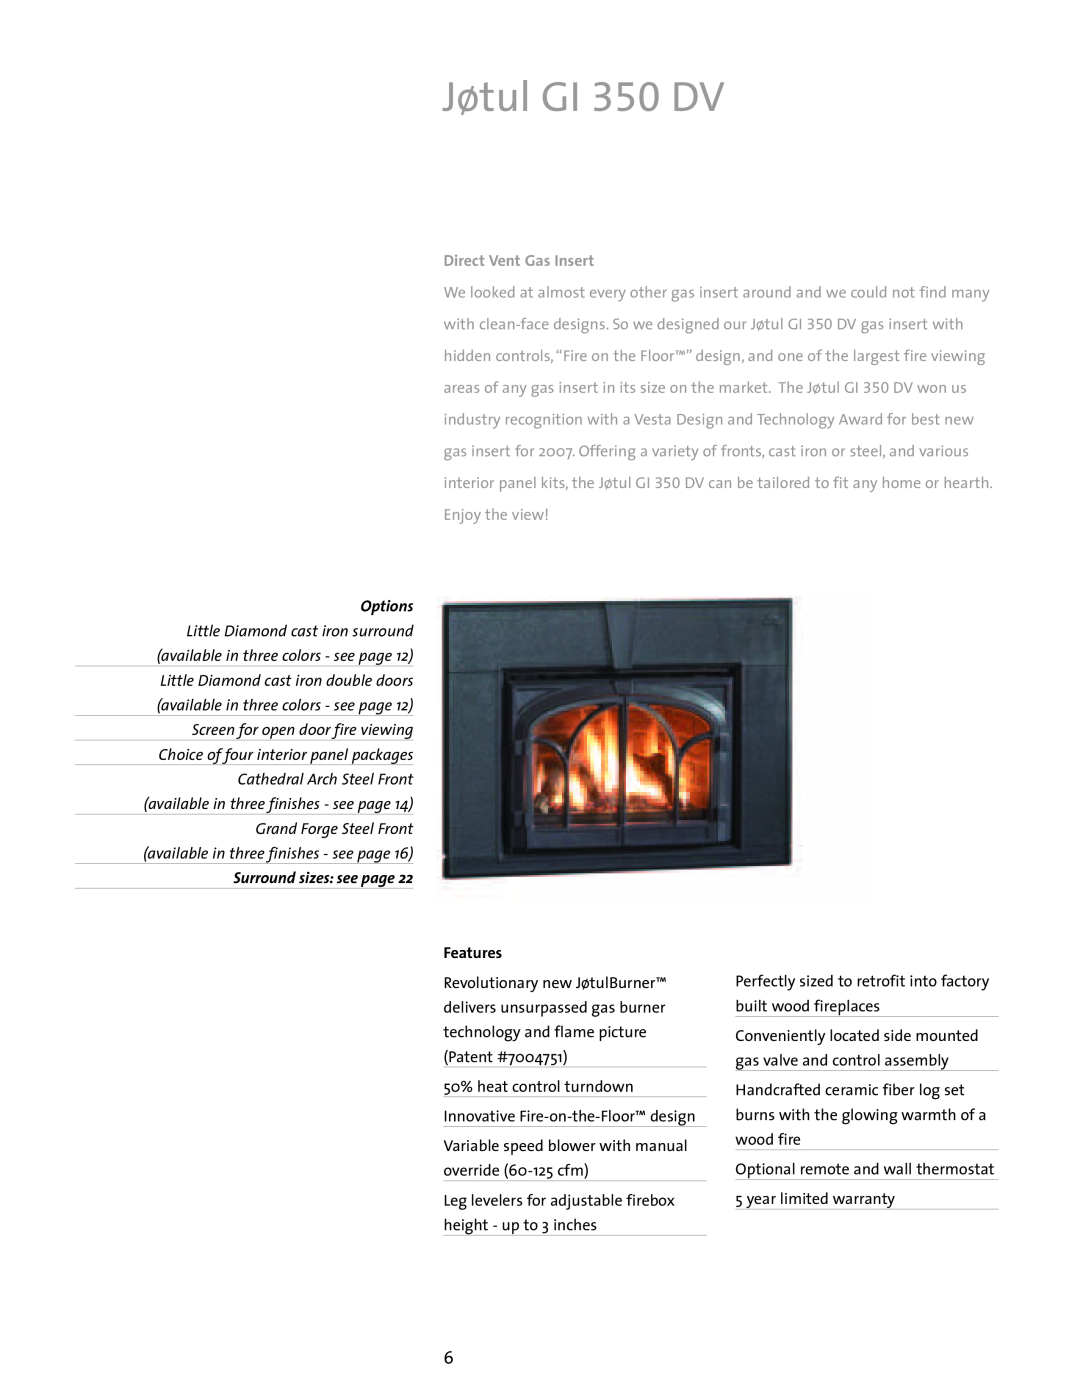 Jotul Gas Inserts and Fireplaces brochure Jøtul GI 350 DV, Direct Vent Gas Insert, Surround sizes: see page 